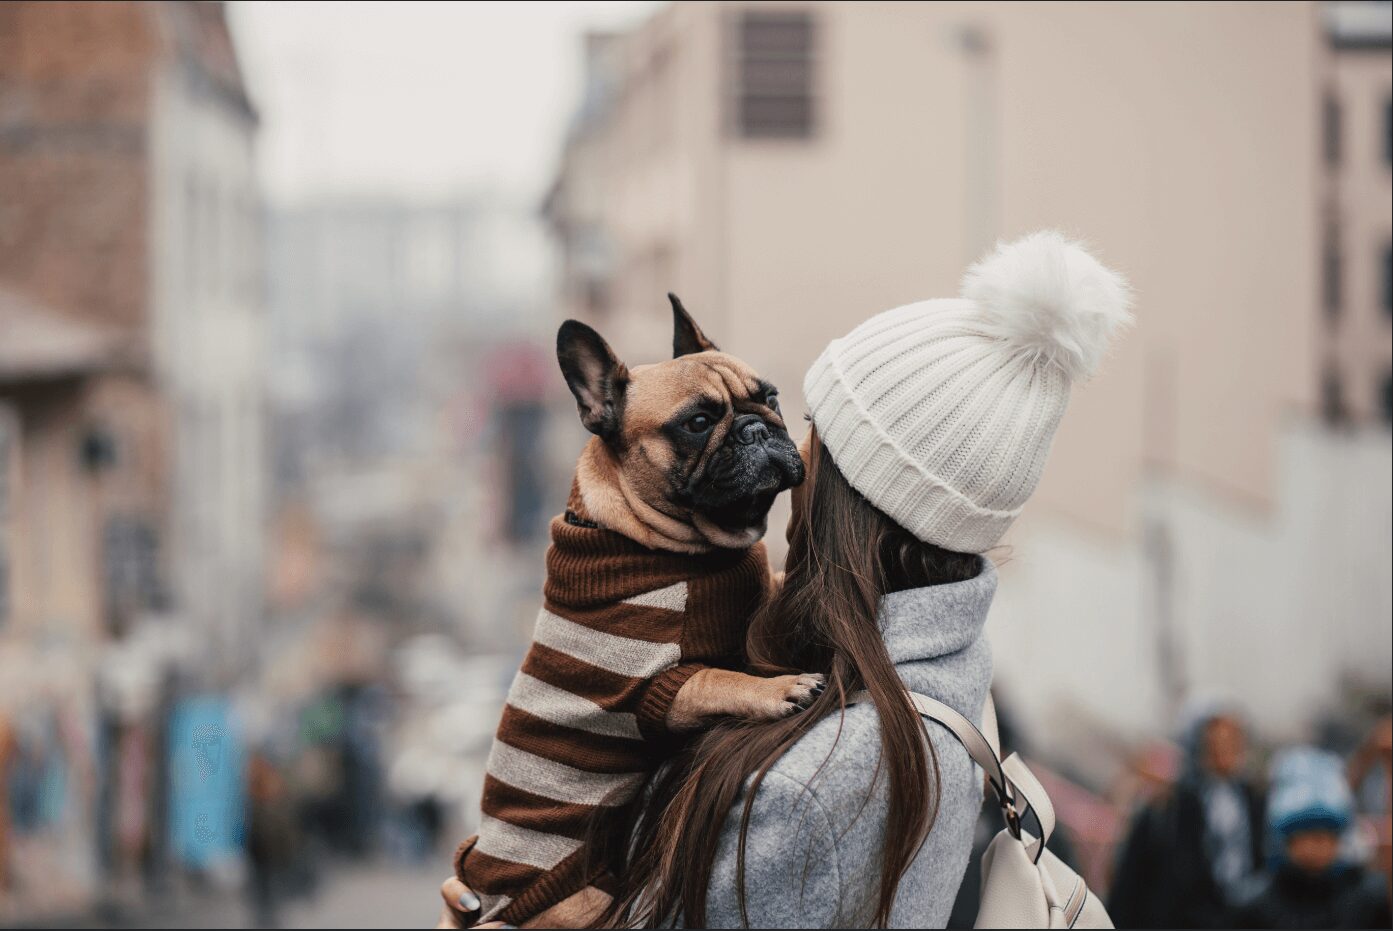 A long-haired woman carries a French bulldog wearing a striped sweater.